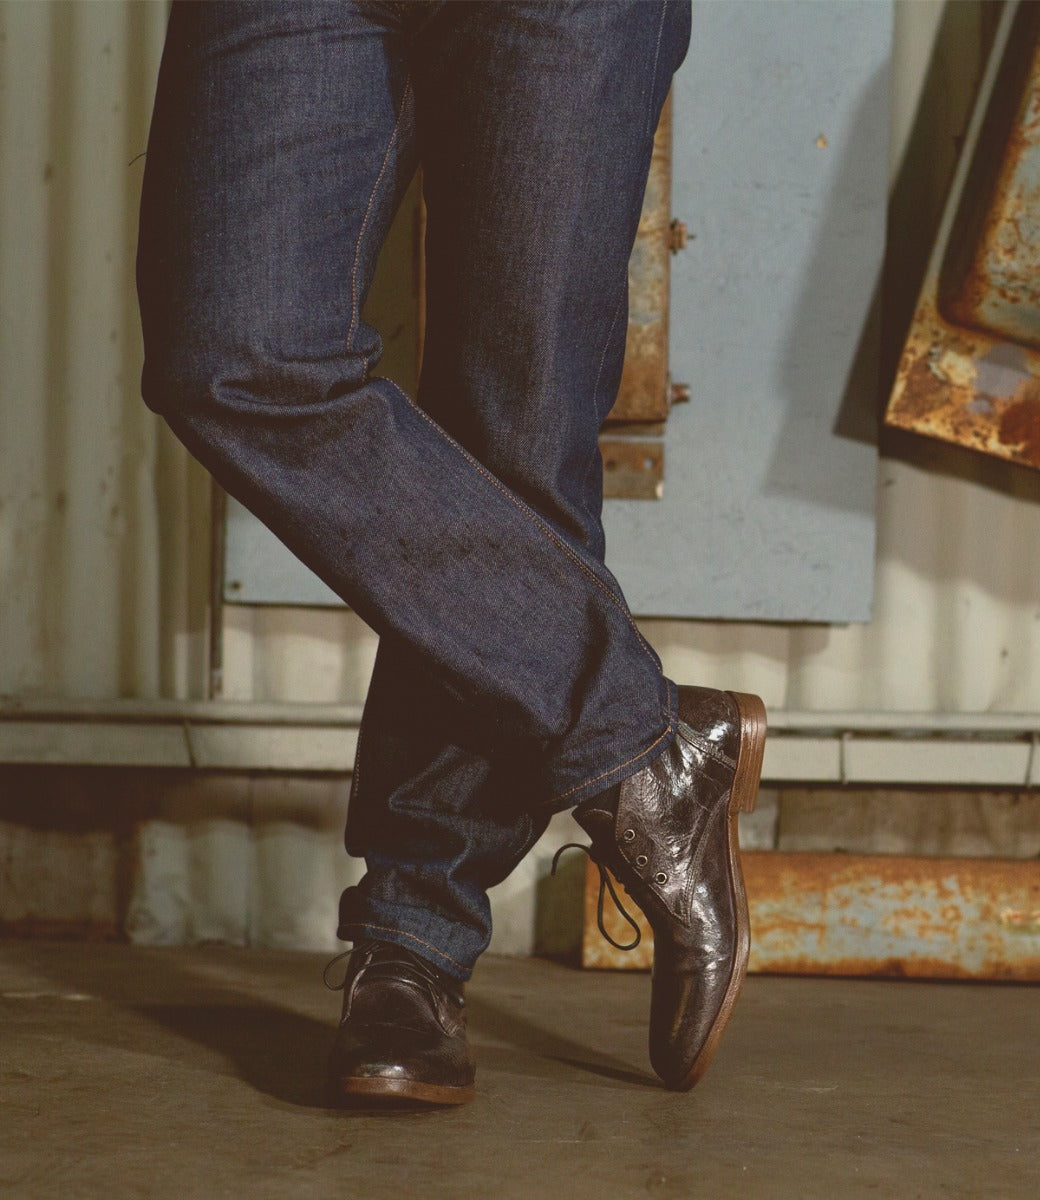 A person wearing jeans and Bed Stu Illiad Teak Rustic Boots standing in an industrial setting.